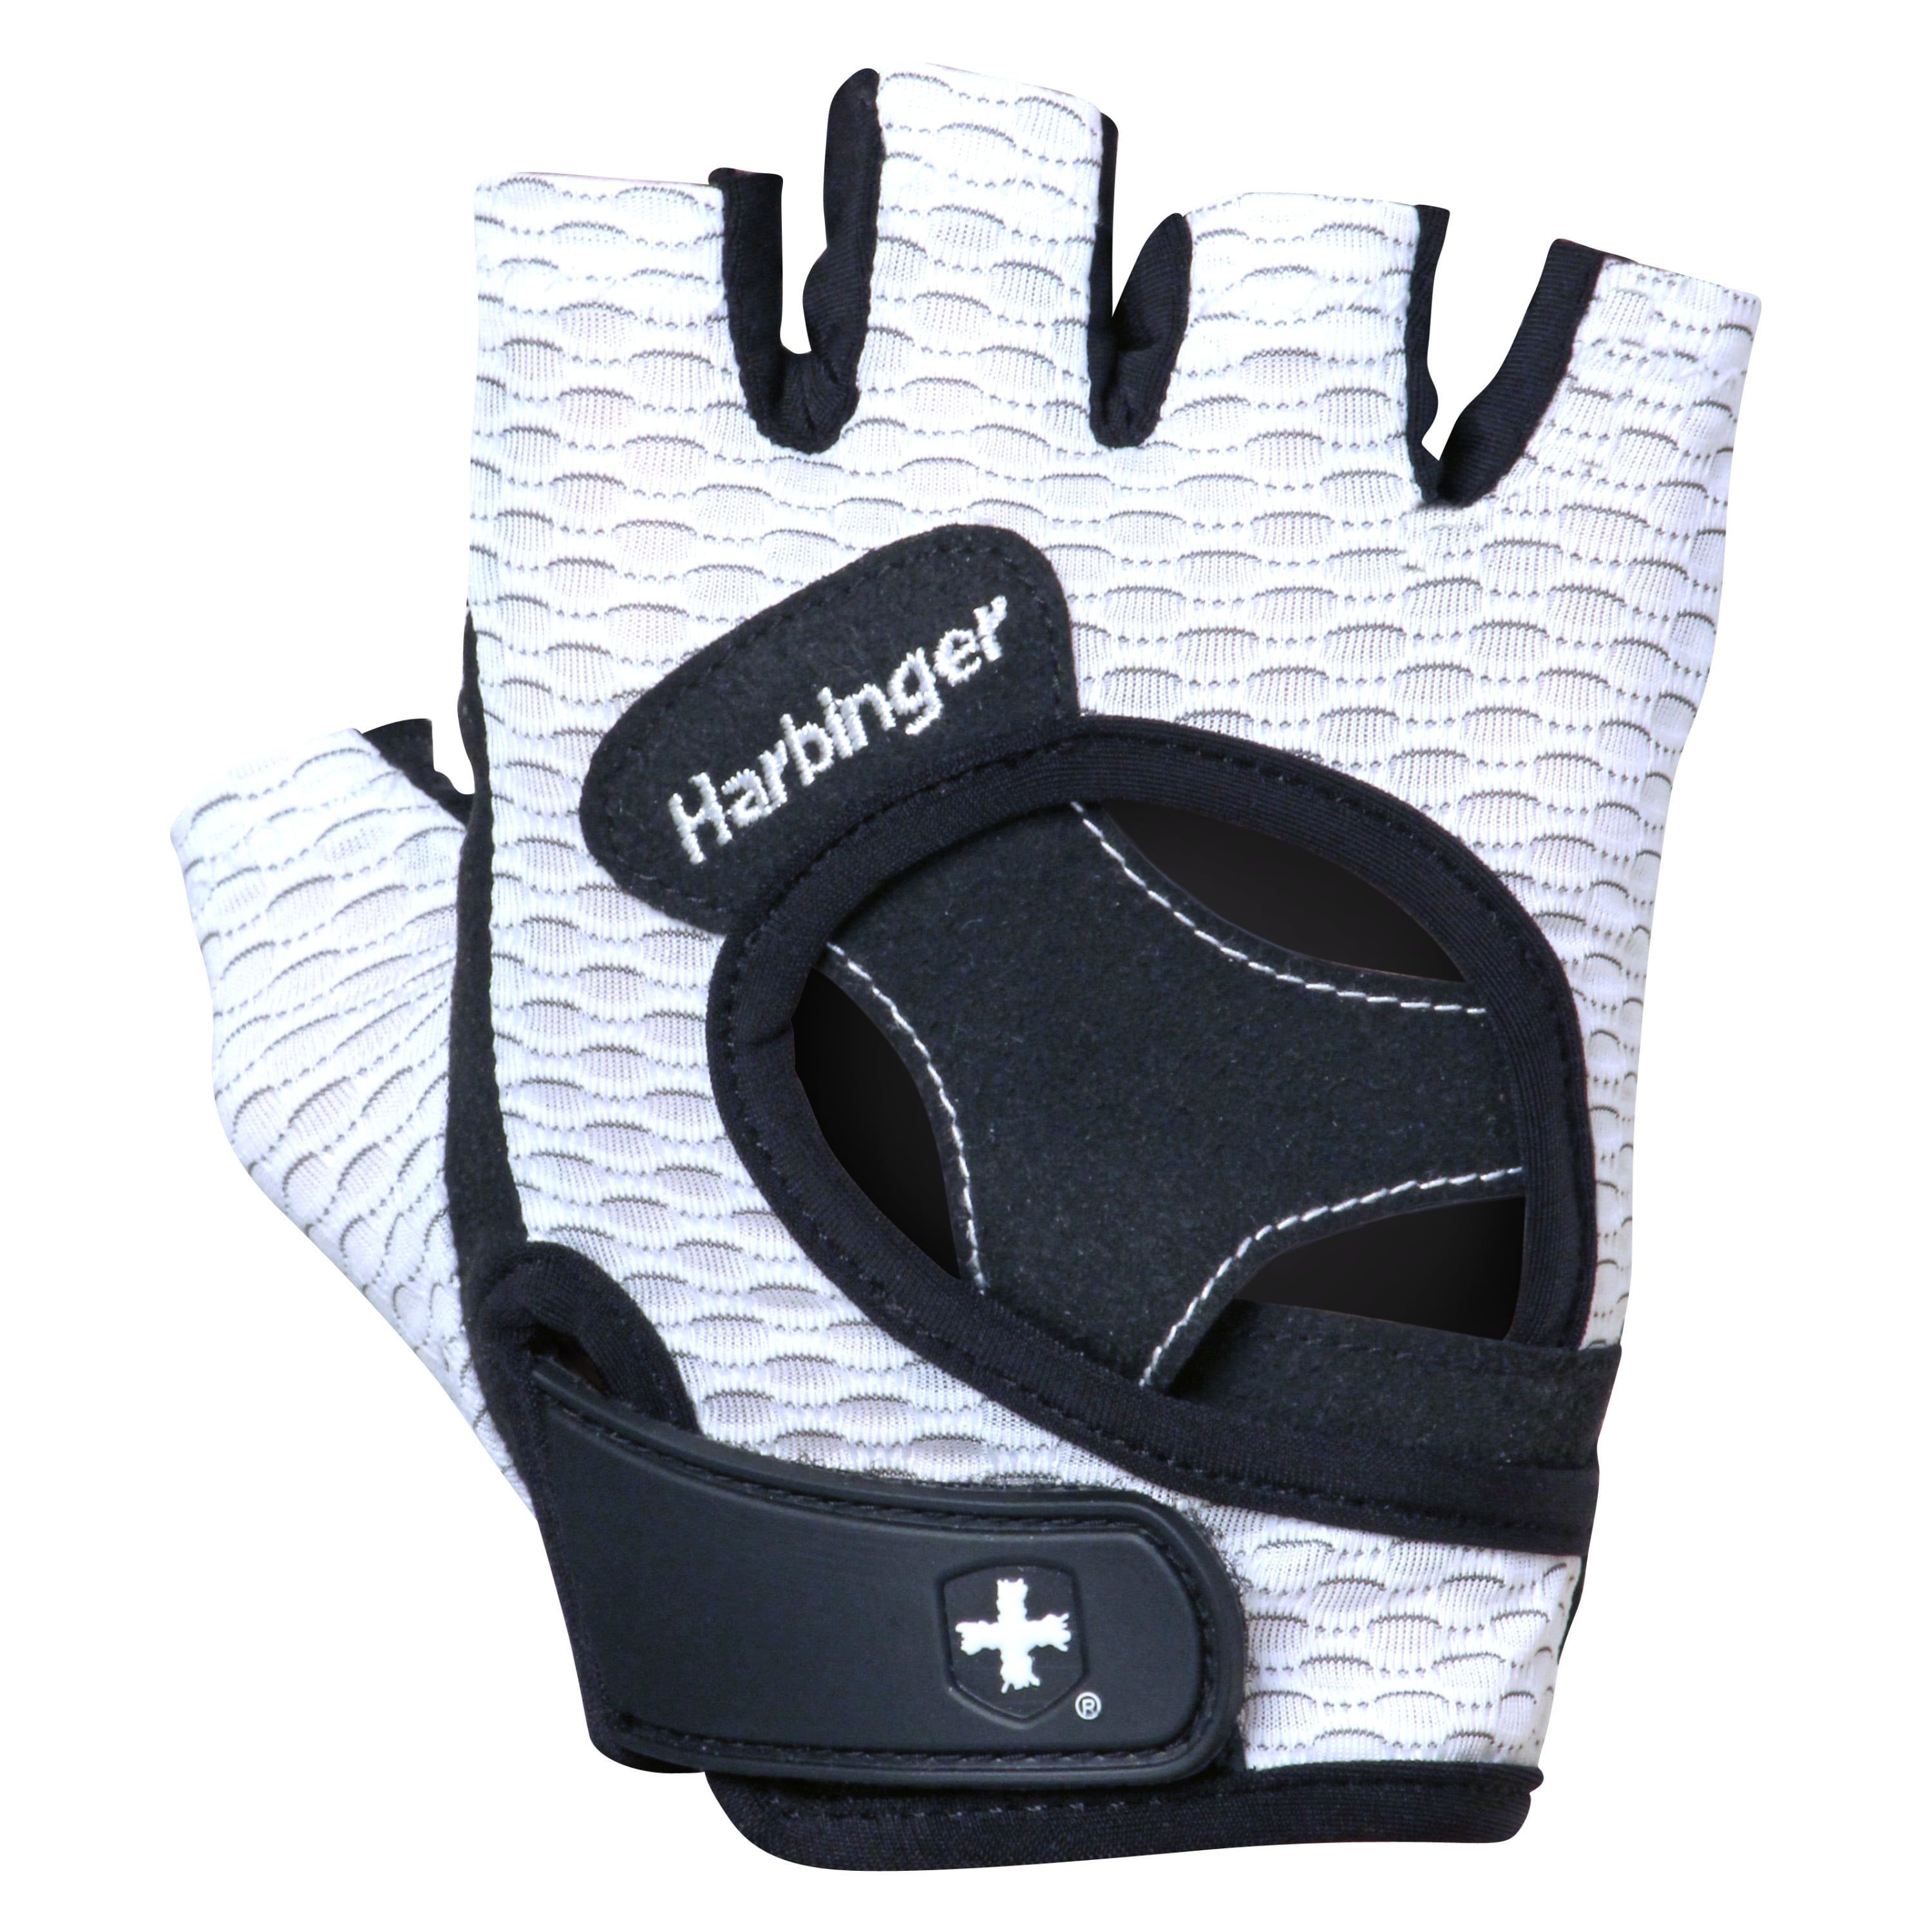 Harbinger Women's Pro Glove Pair Wash and Dry Black/Gray SMALL 